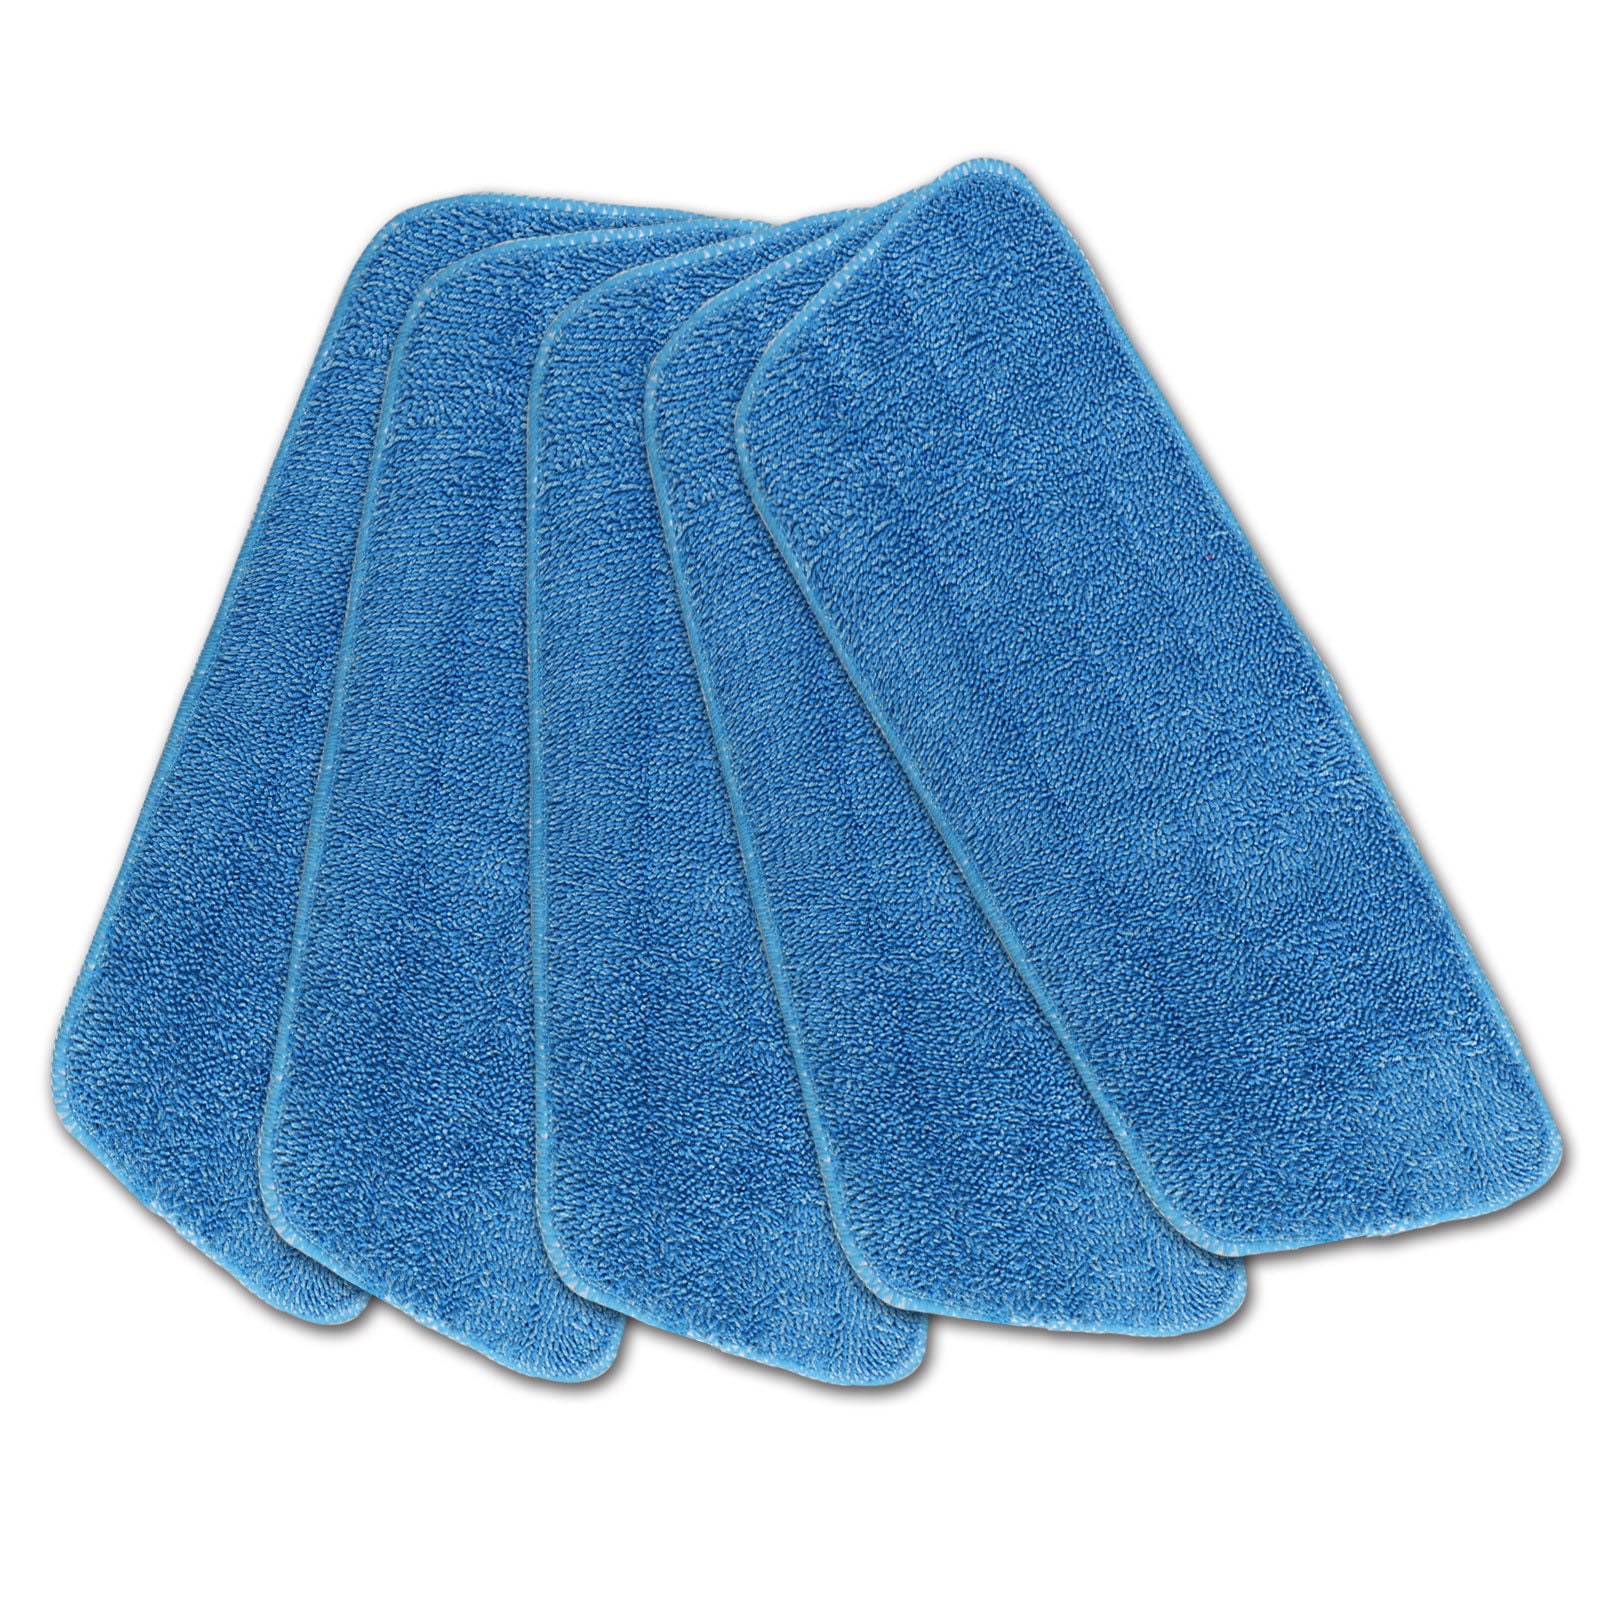 10pcs Replacement Mop Pads Microfiber Cleaning Pad Cloth for Squeeze Flat Mops 